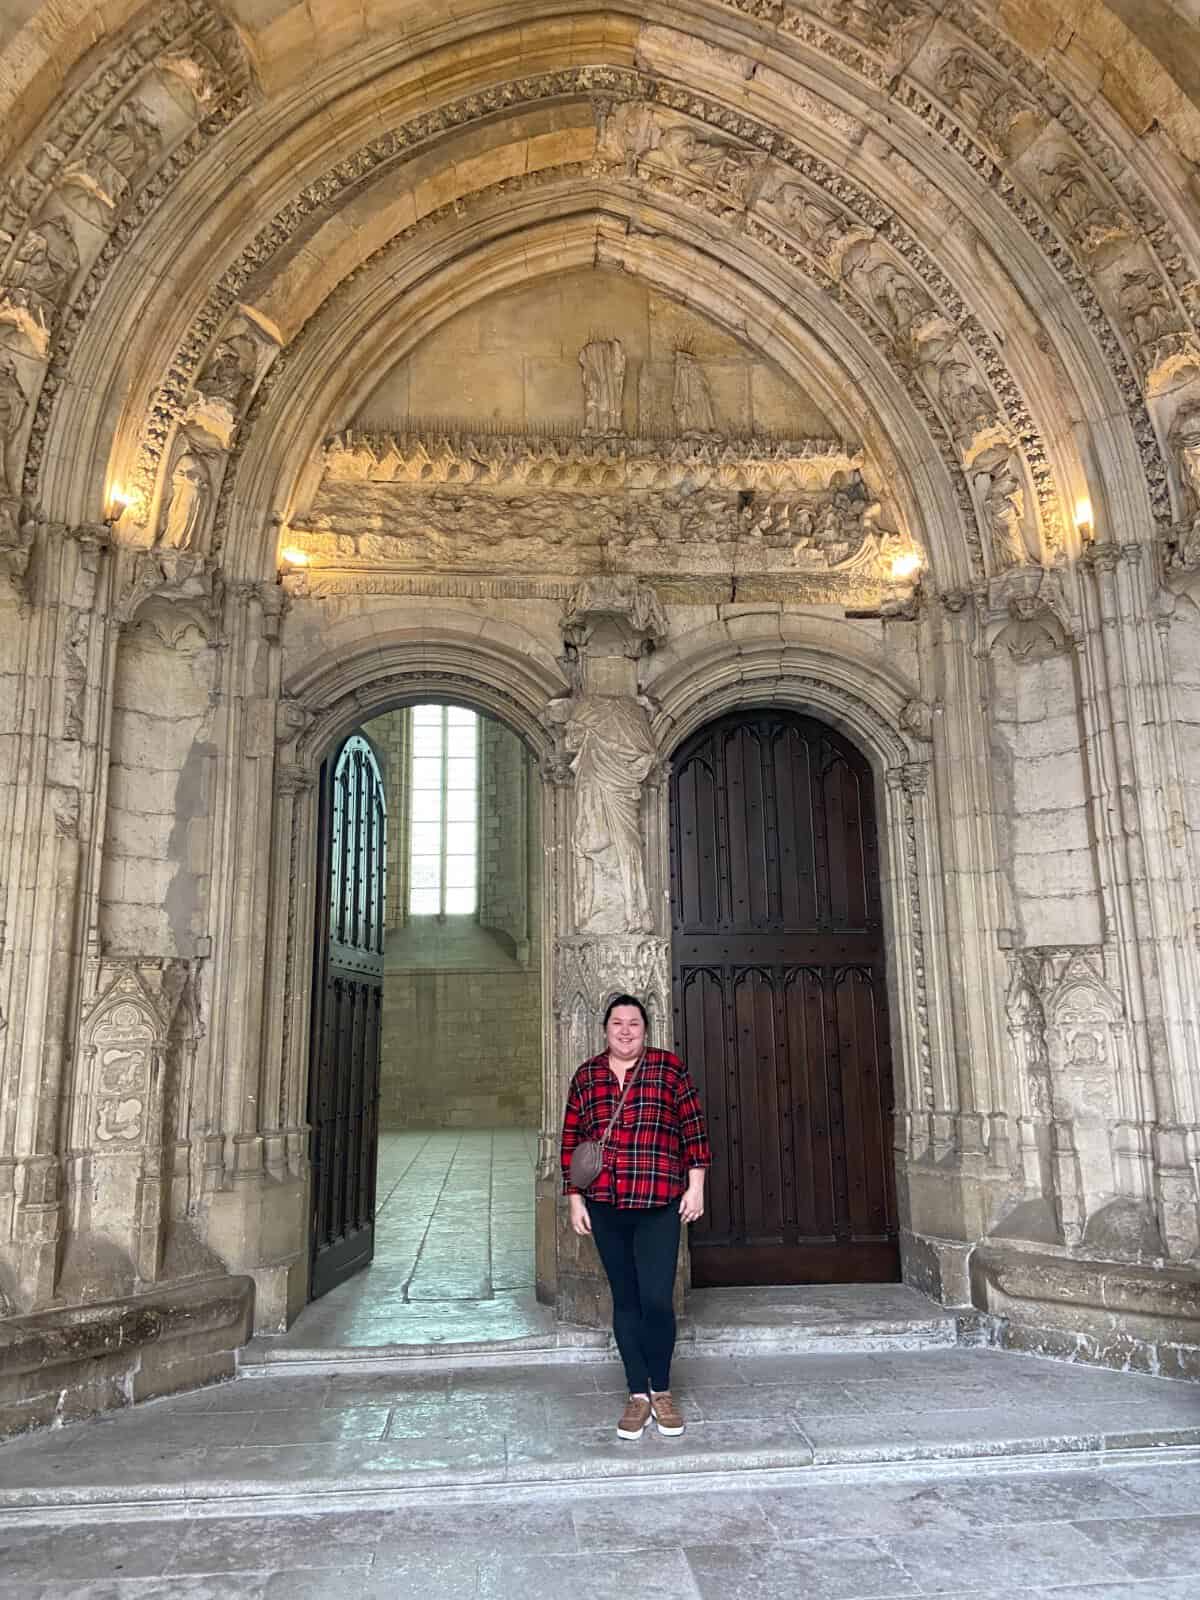 Riana standing in front of an arched doorway inside the Palais des Papes, Avignon, France